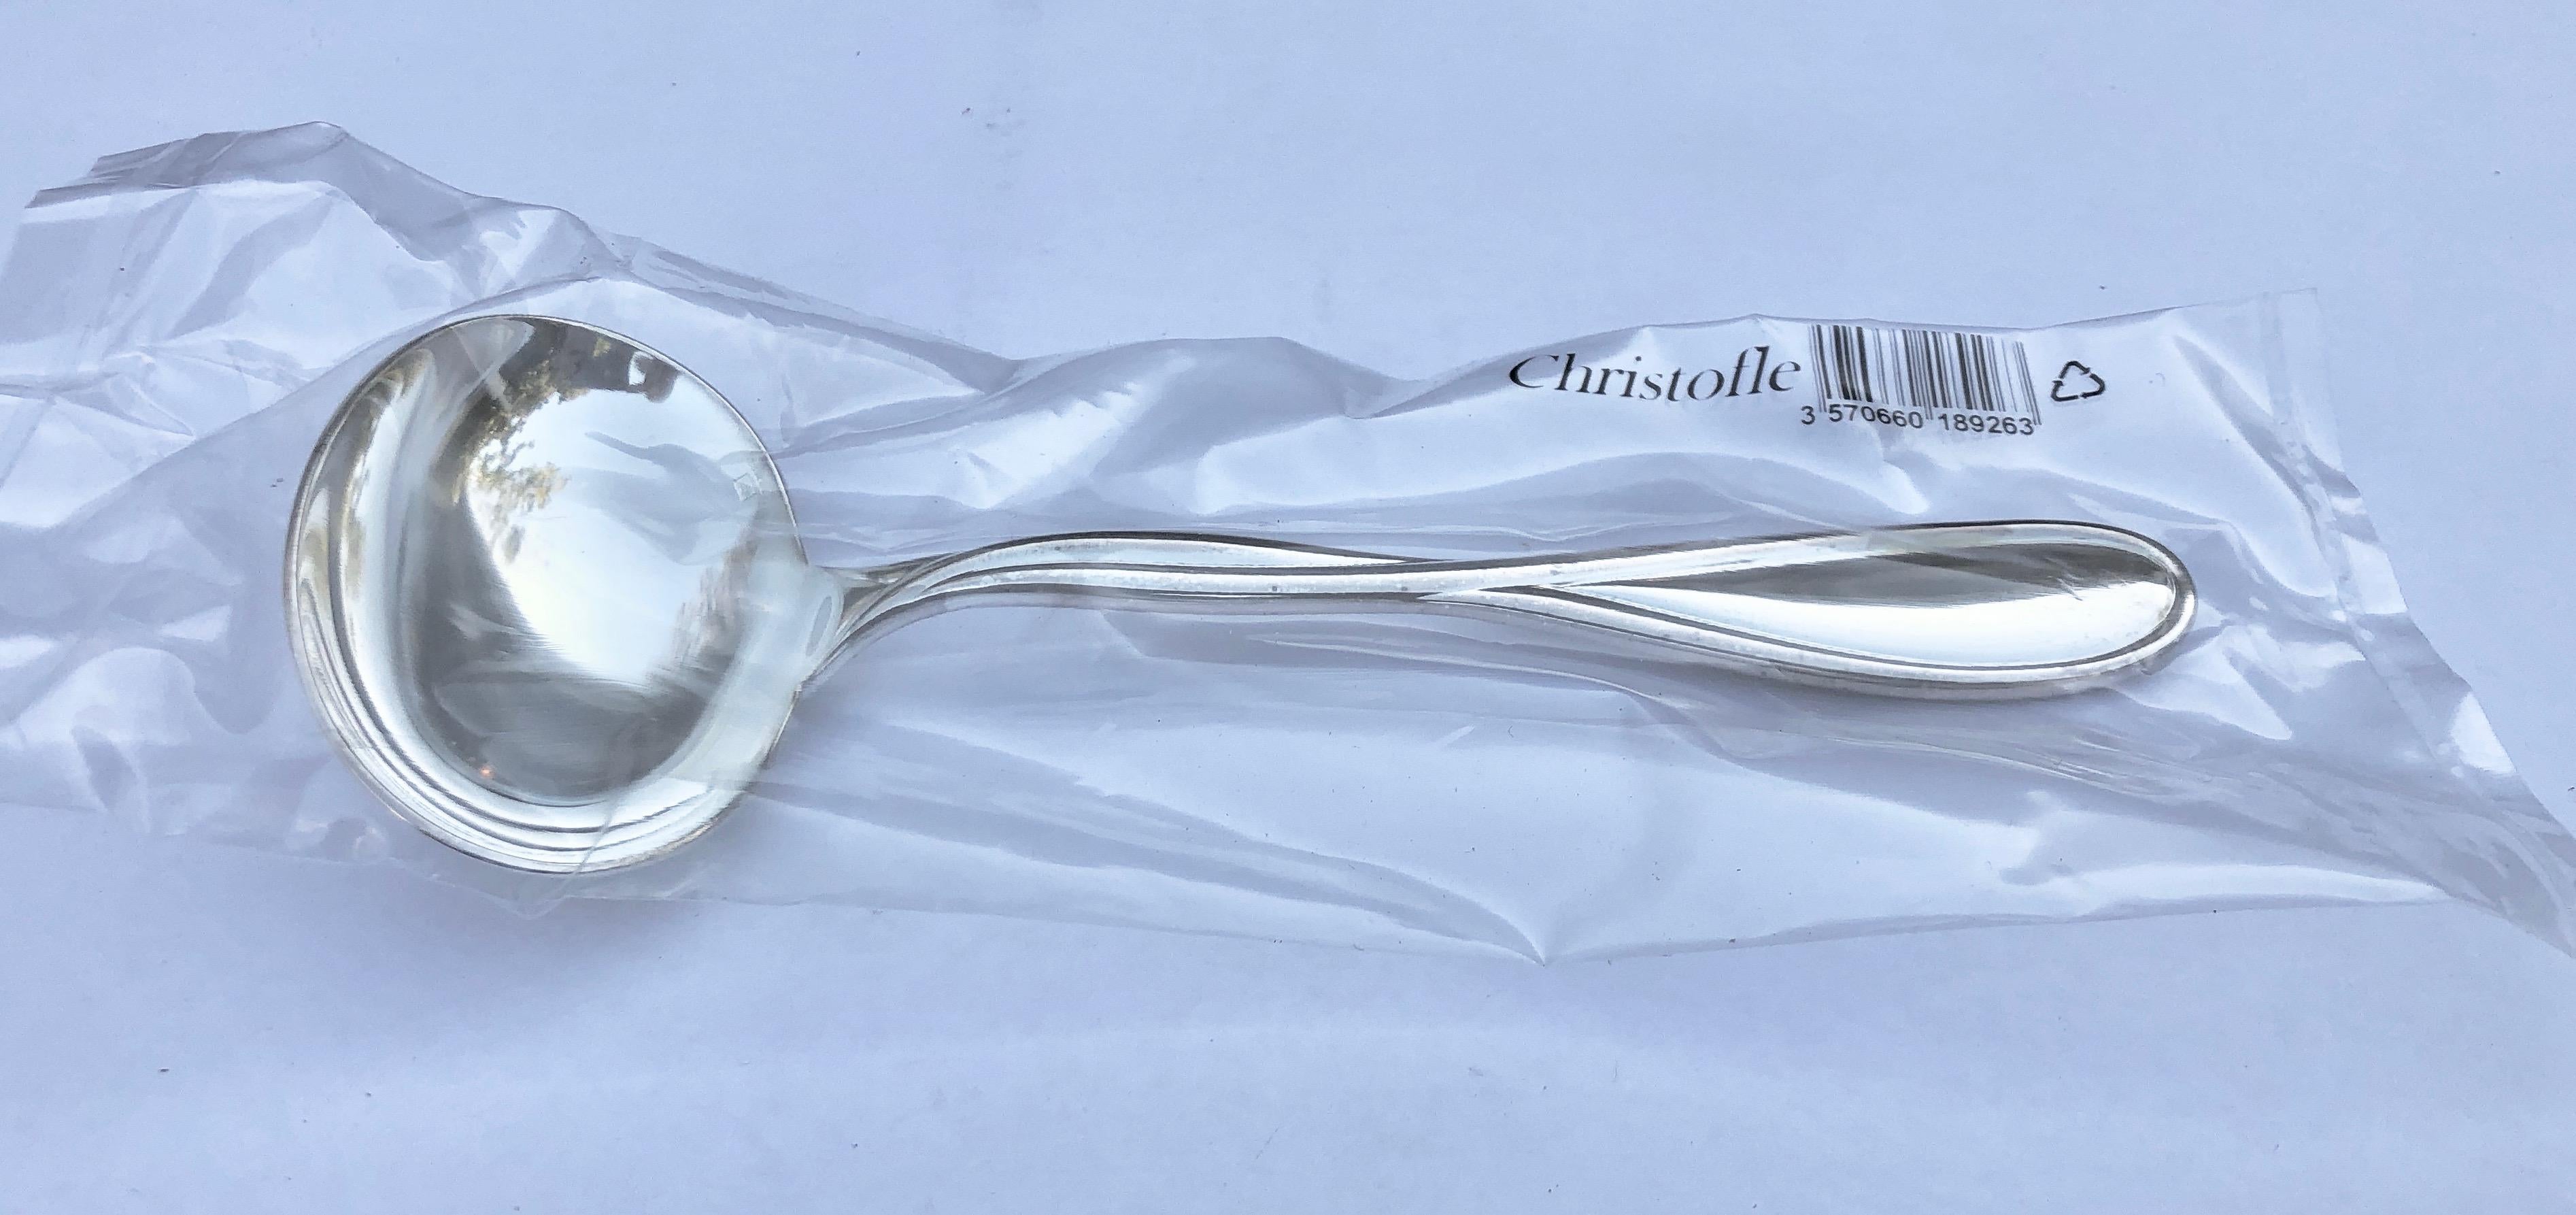 This is a beautiful French silver plated Christofle Galea gravy ladle. There are 4 sets available for all your table serving needs. All the pieces are new, never used and under their original plastic pouches and Christofle boxes.

Launched in